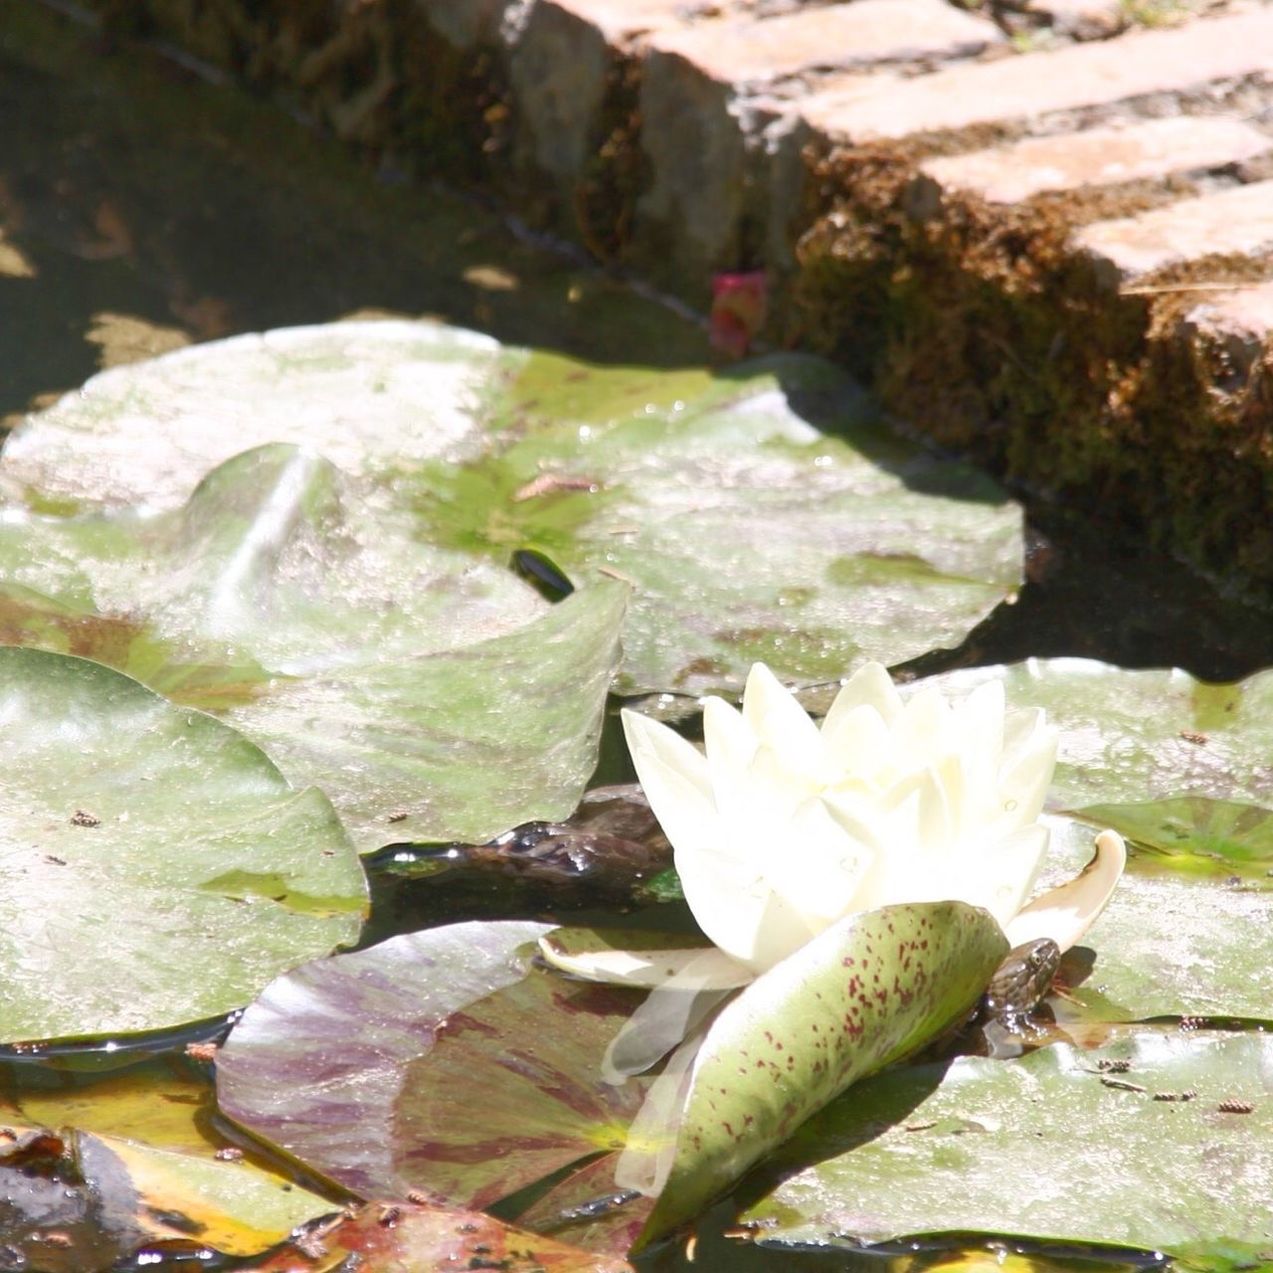 CLOSE-UP OF WHITE FLOWERS IN WATER